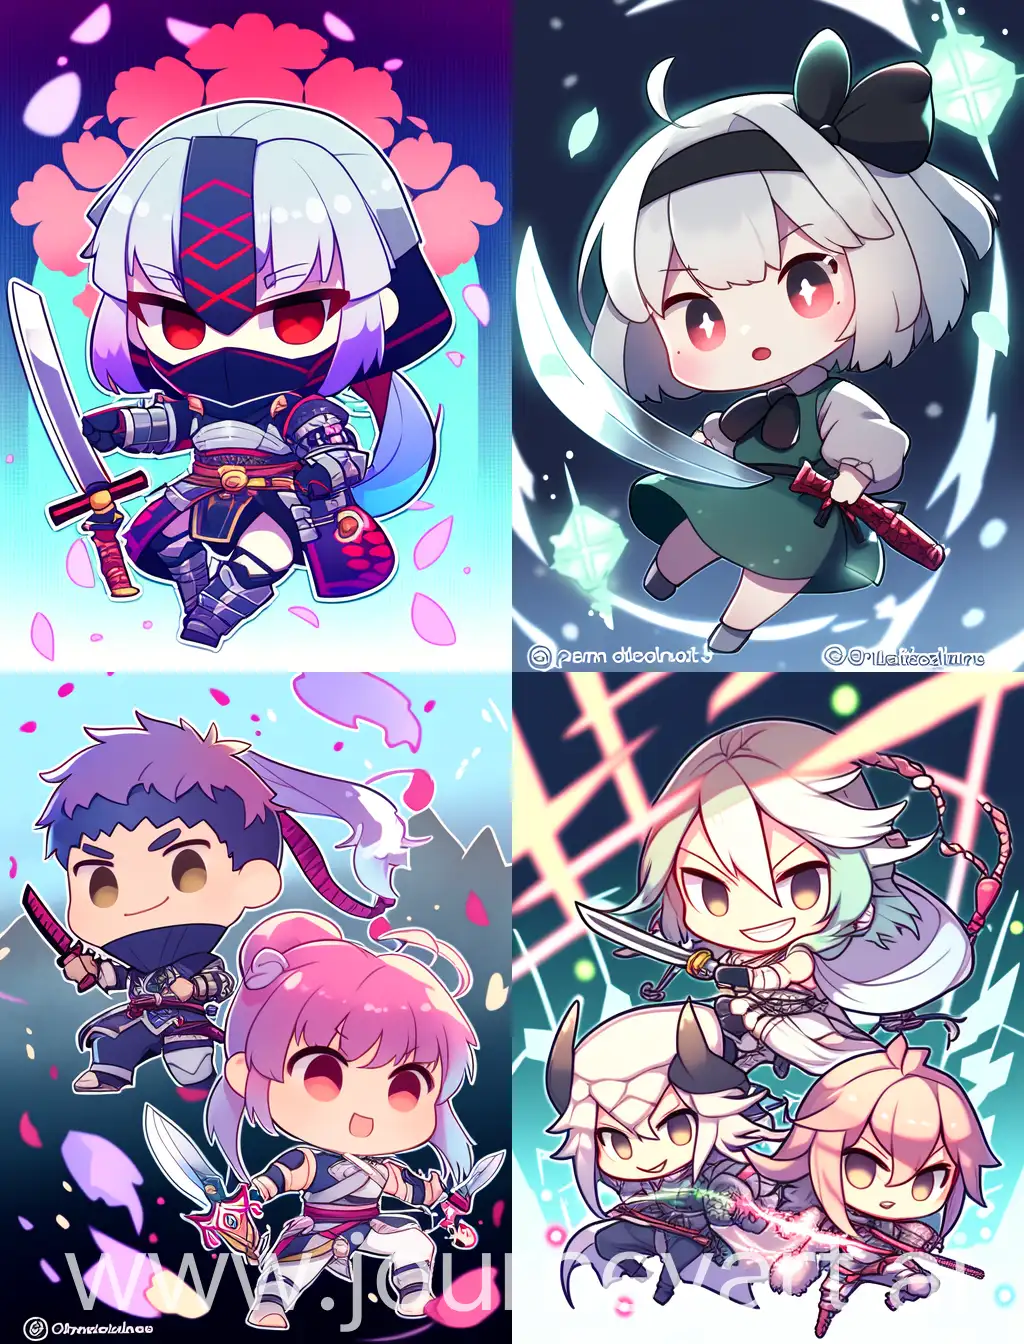 Chibi-Bandits-Holding-Knife-Playful-Anime-Characters-in-Abstract-Landscape